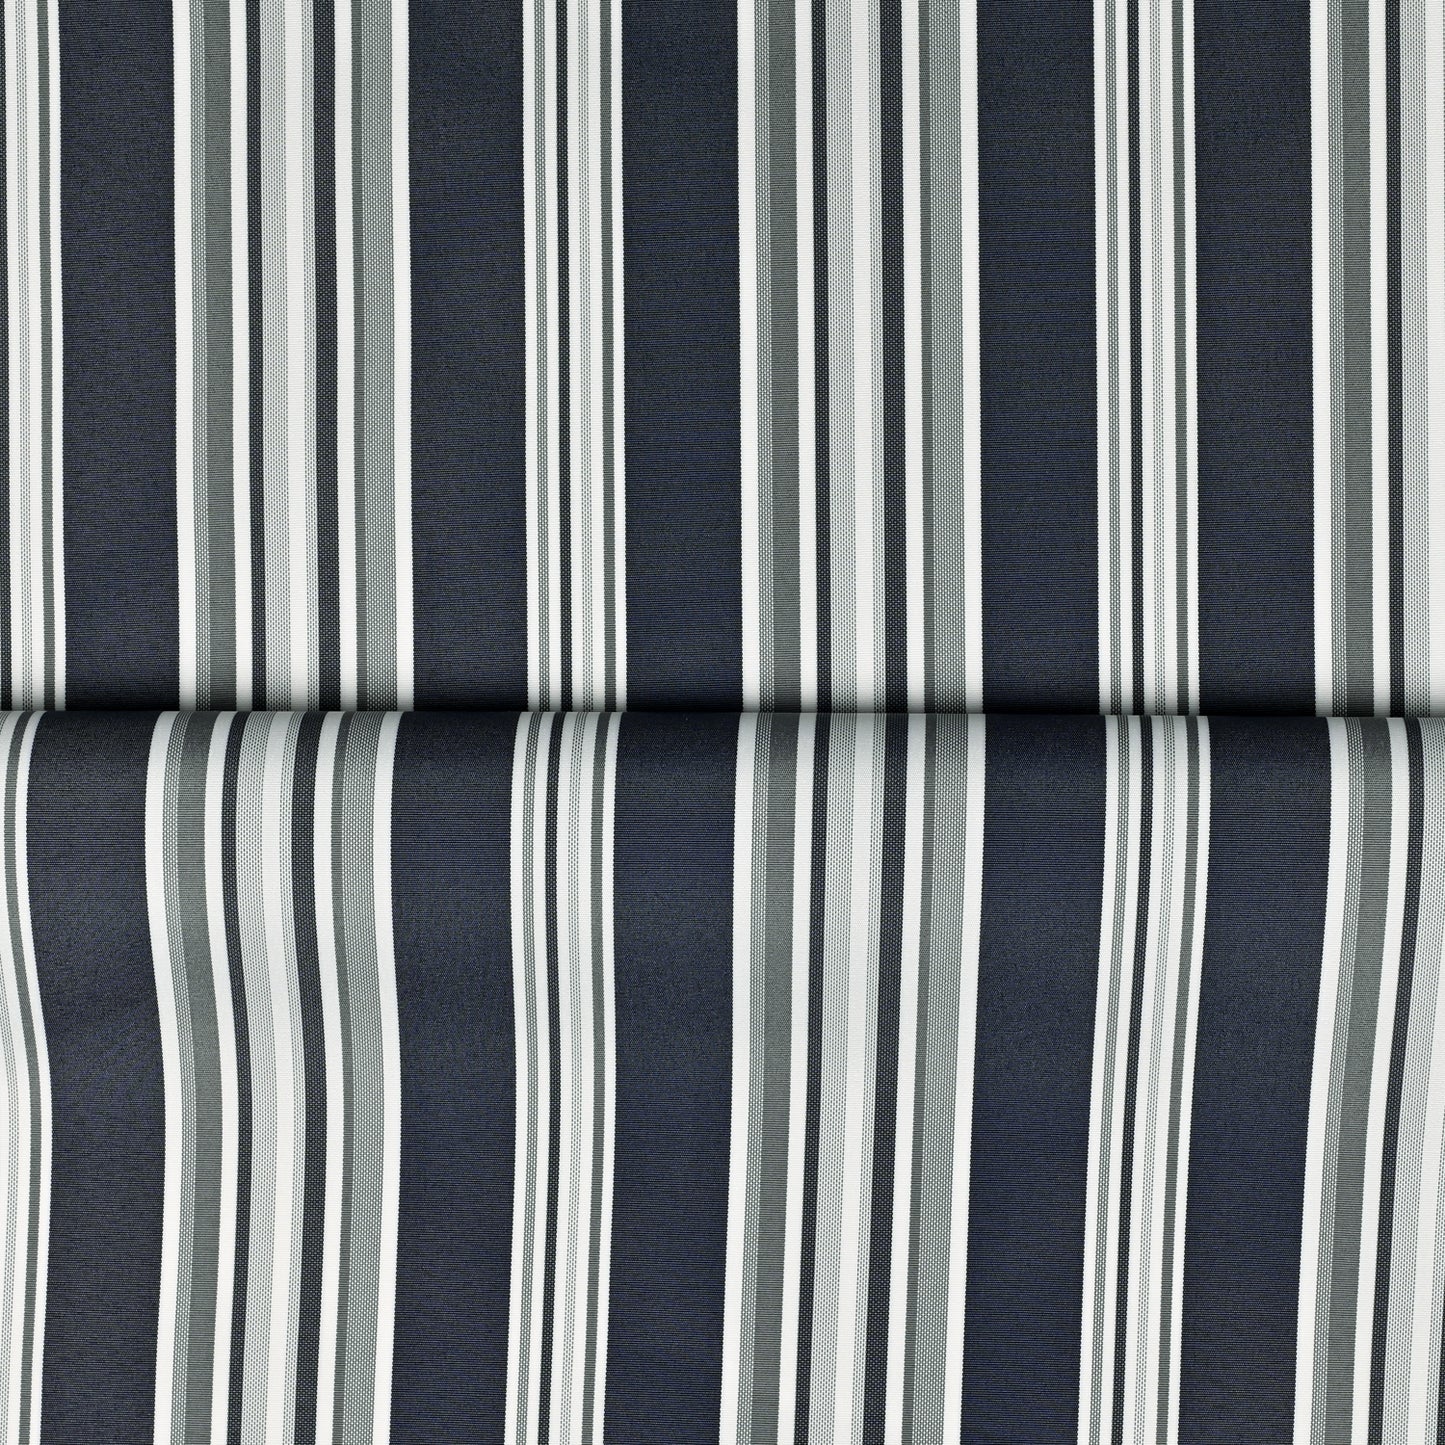 BAHAMAS Imported Outdoor Fabric Des. 02-84